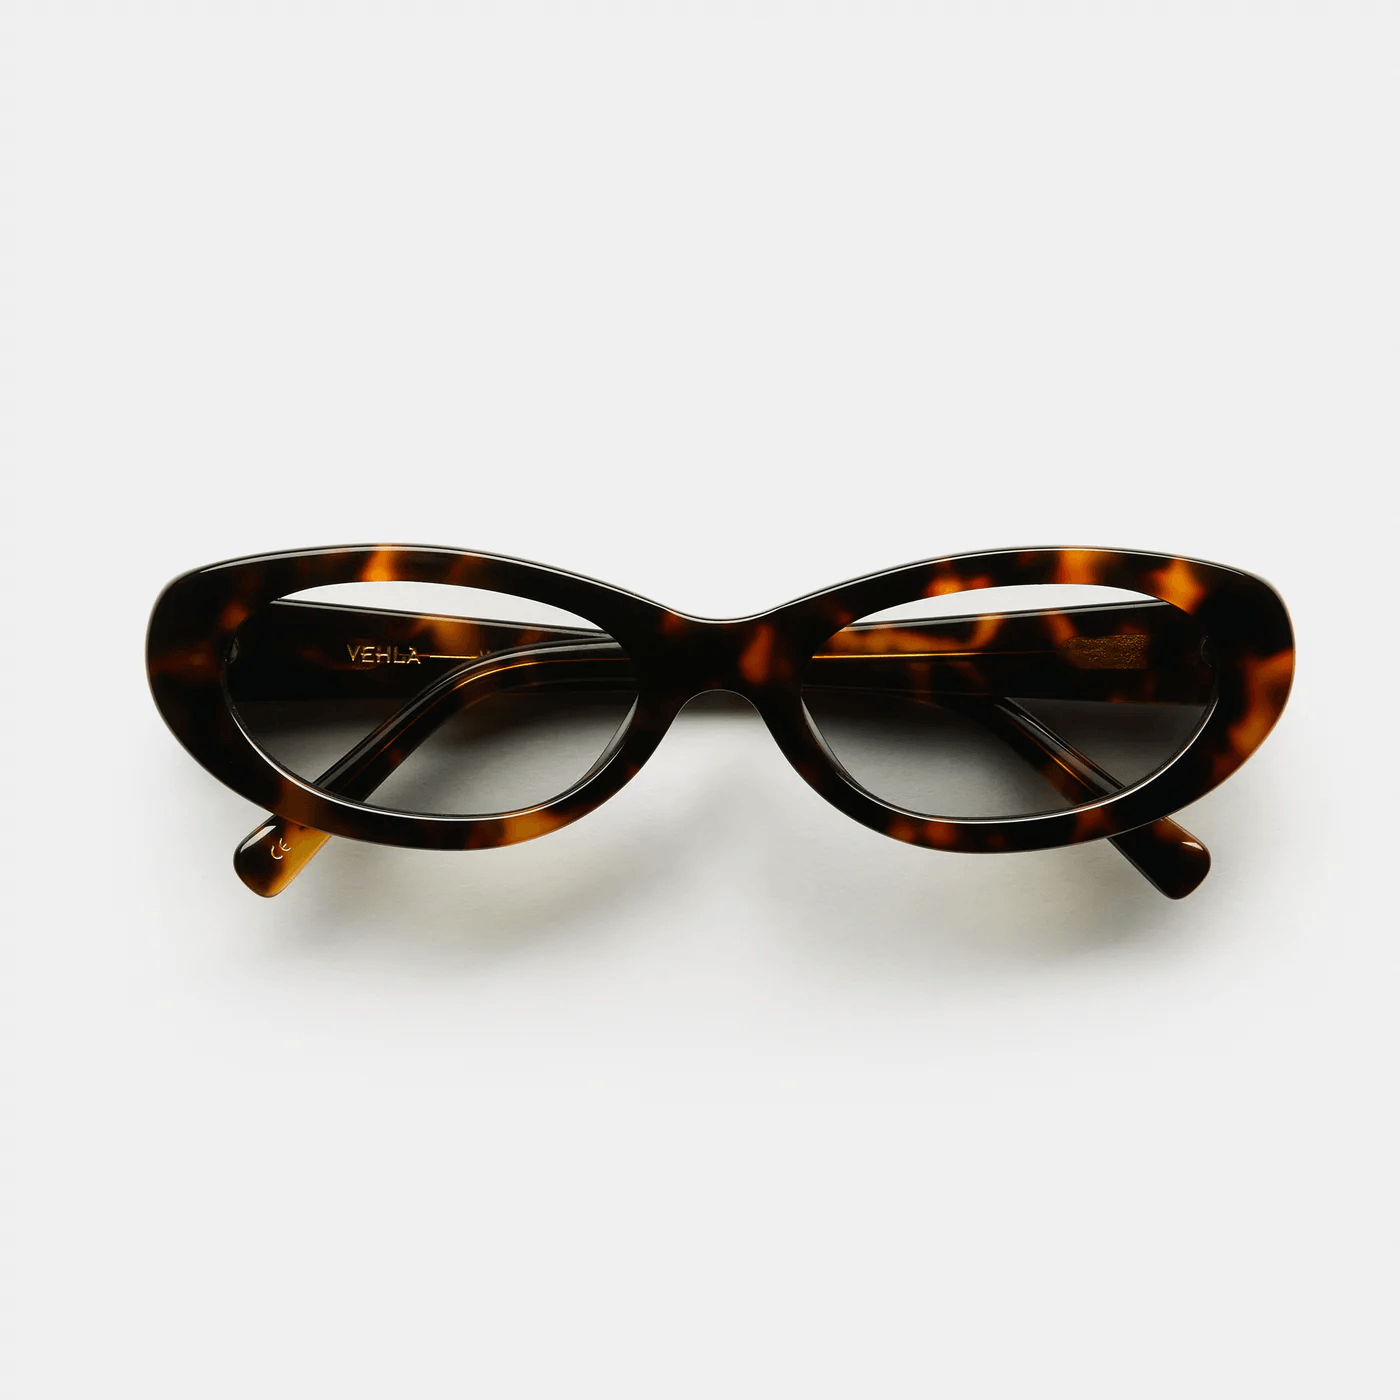 VEHLA SUNGLASSES WILLOW - CHOC TORT/GRAPHITE - The Iconic Issue